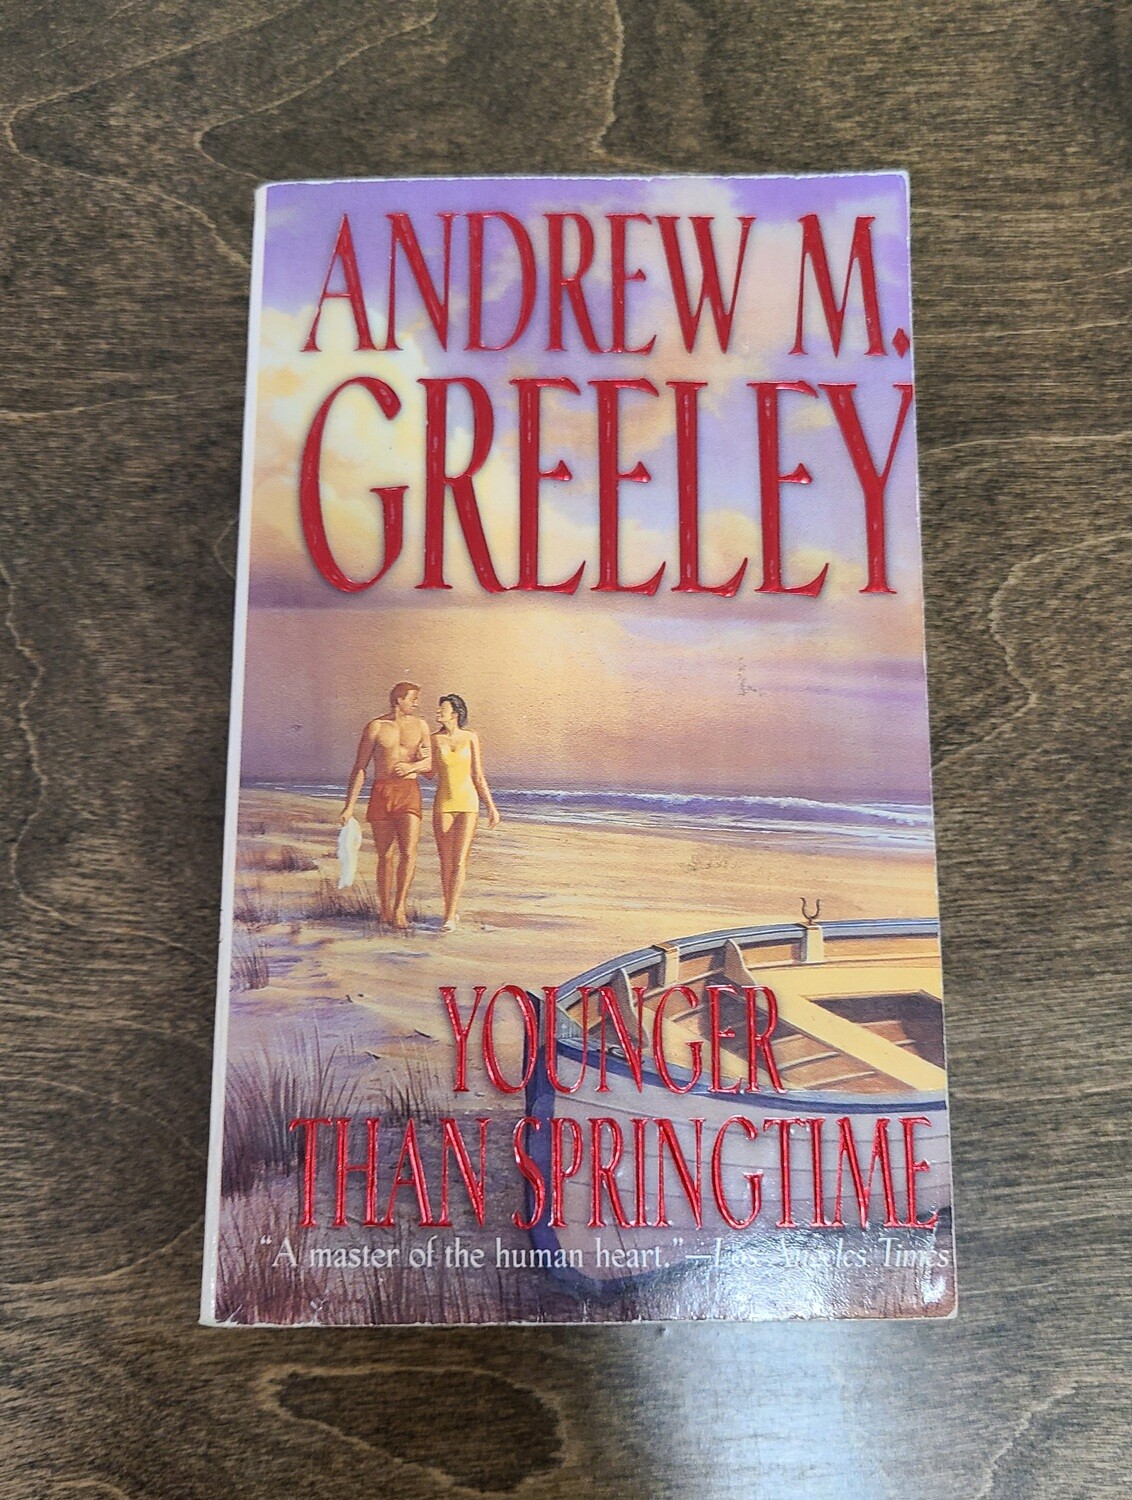 Younger than Springtime by Andrew M. Greeley